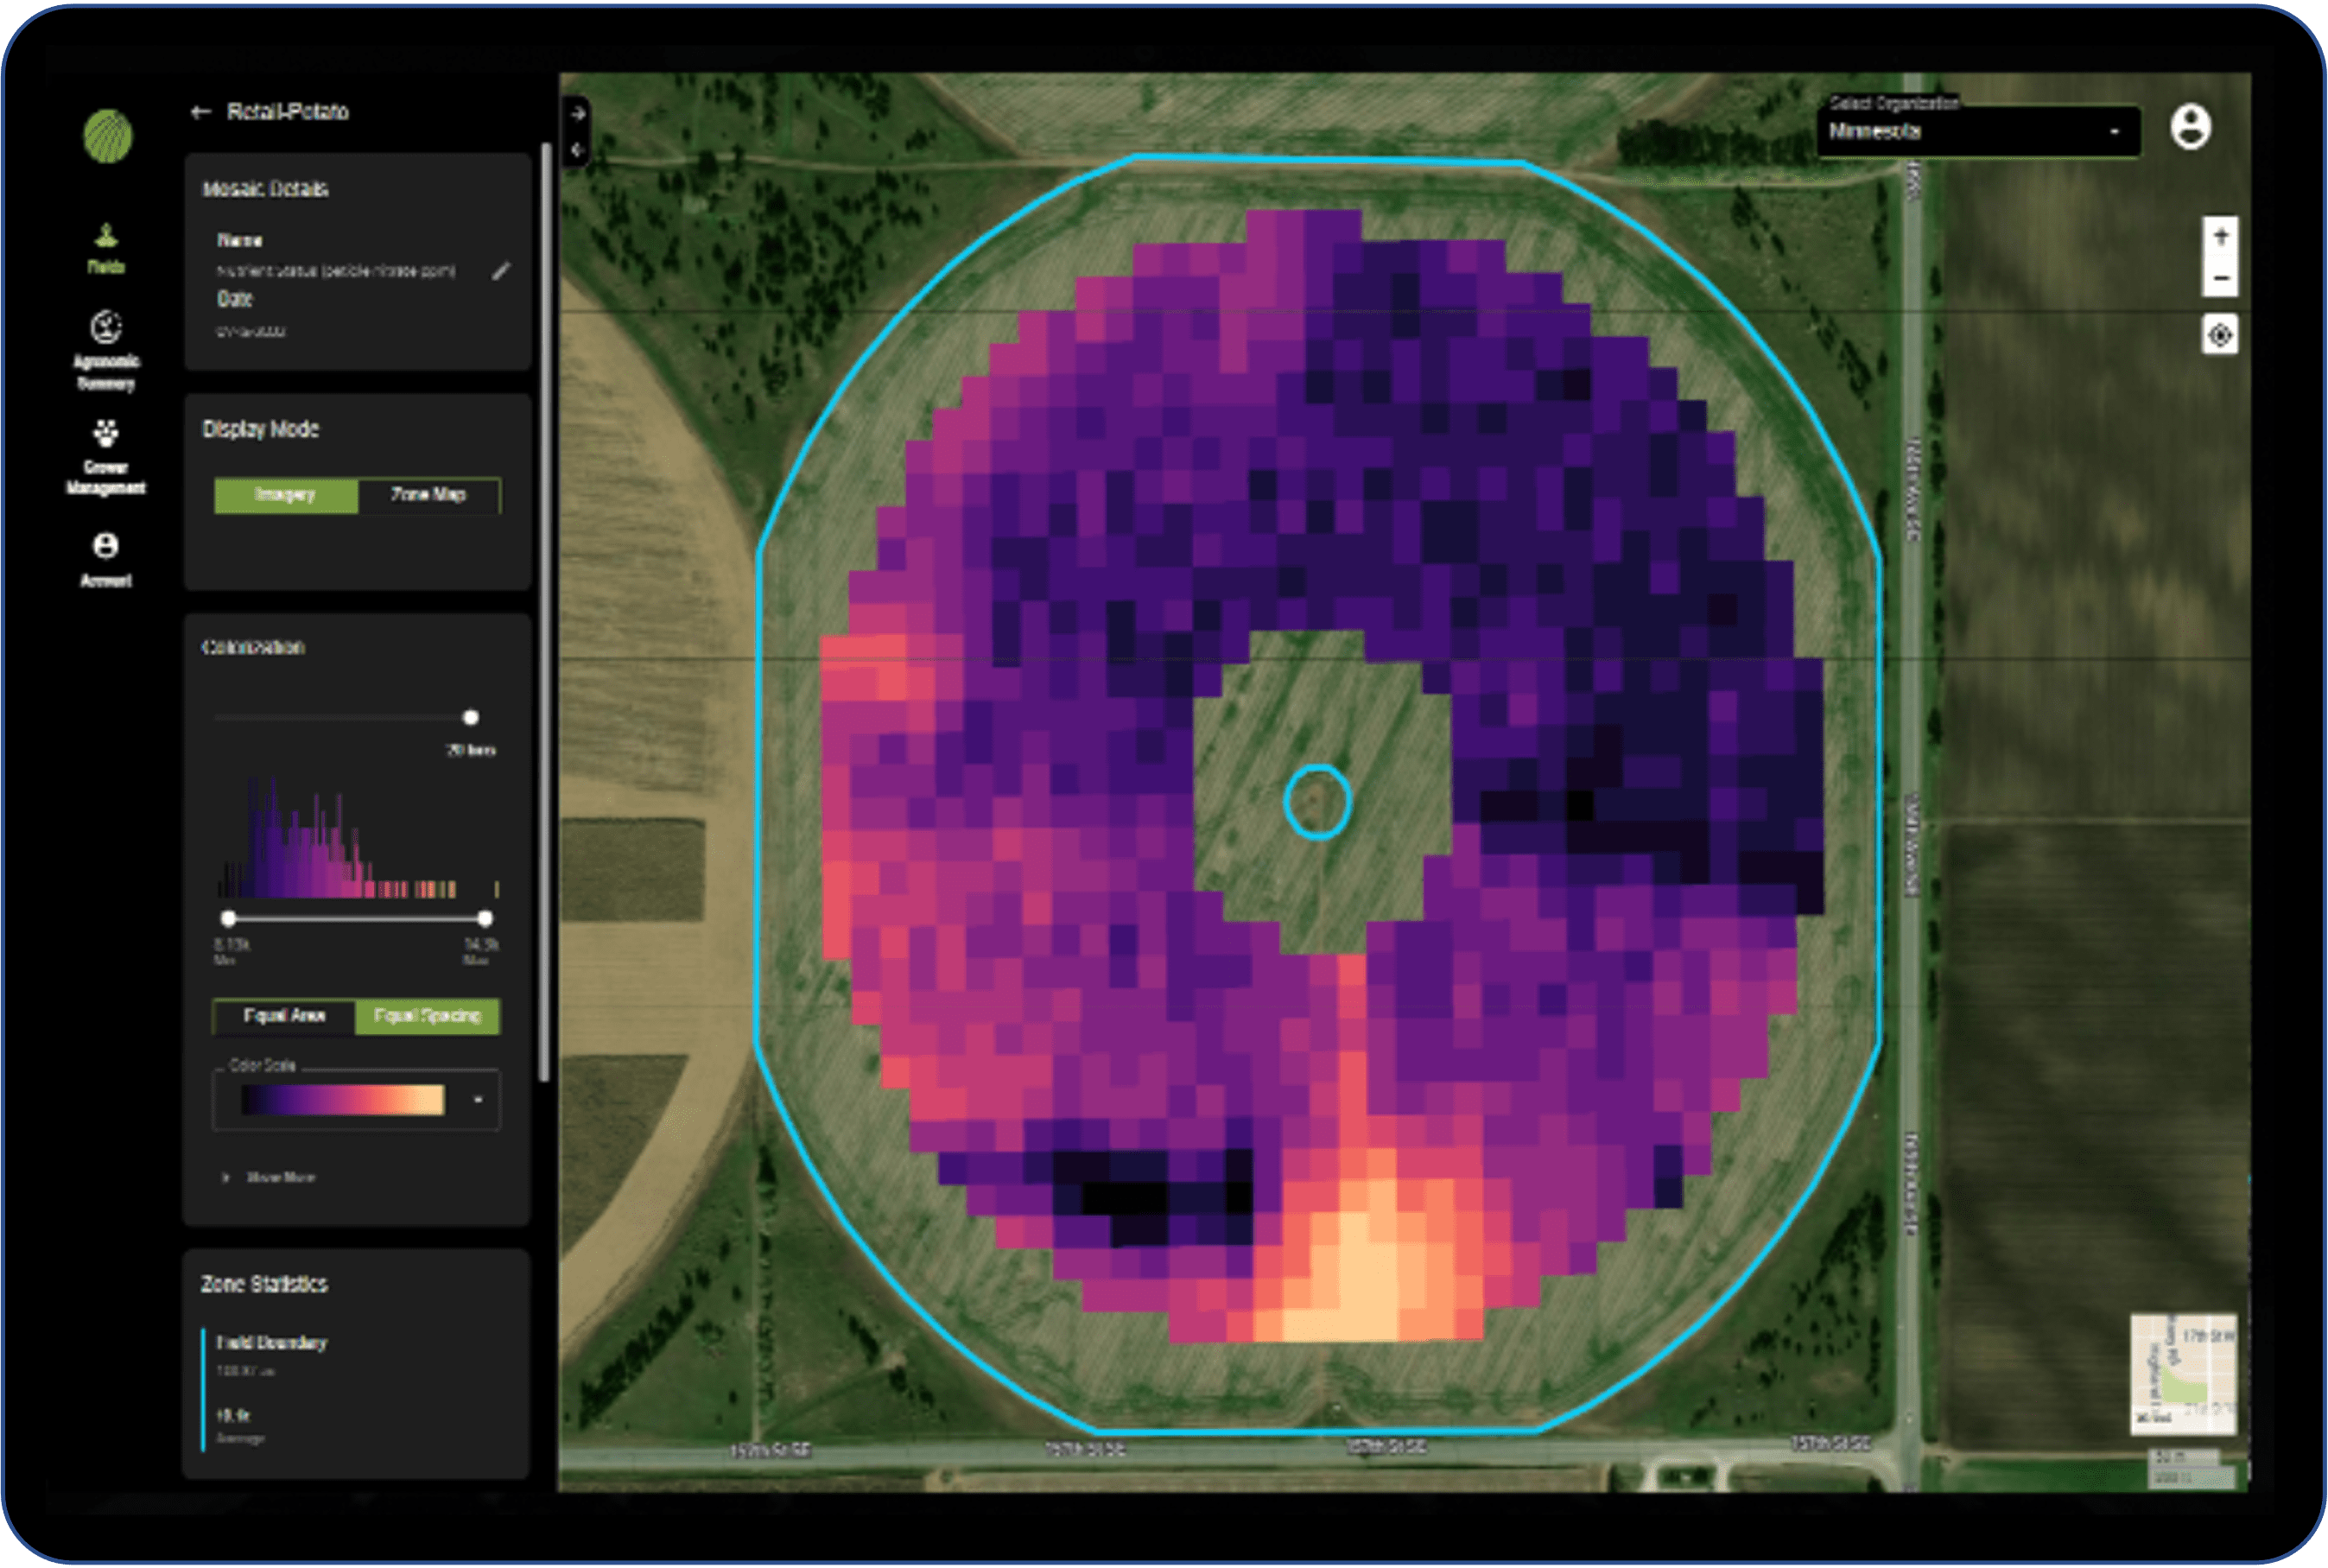 Sentera offers a Validation Program to easily see if Ag Modeling works